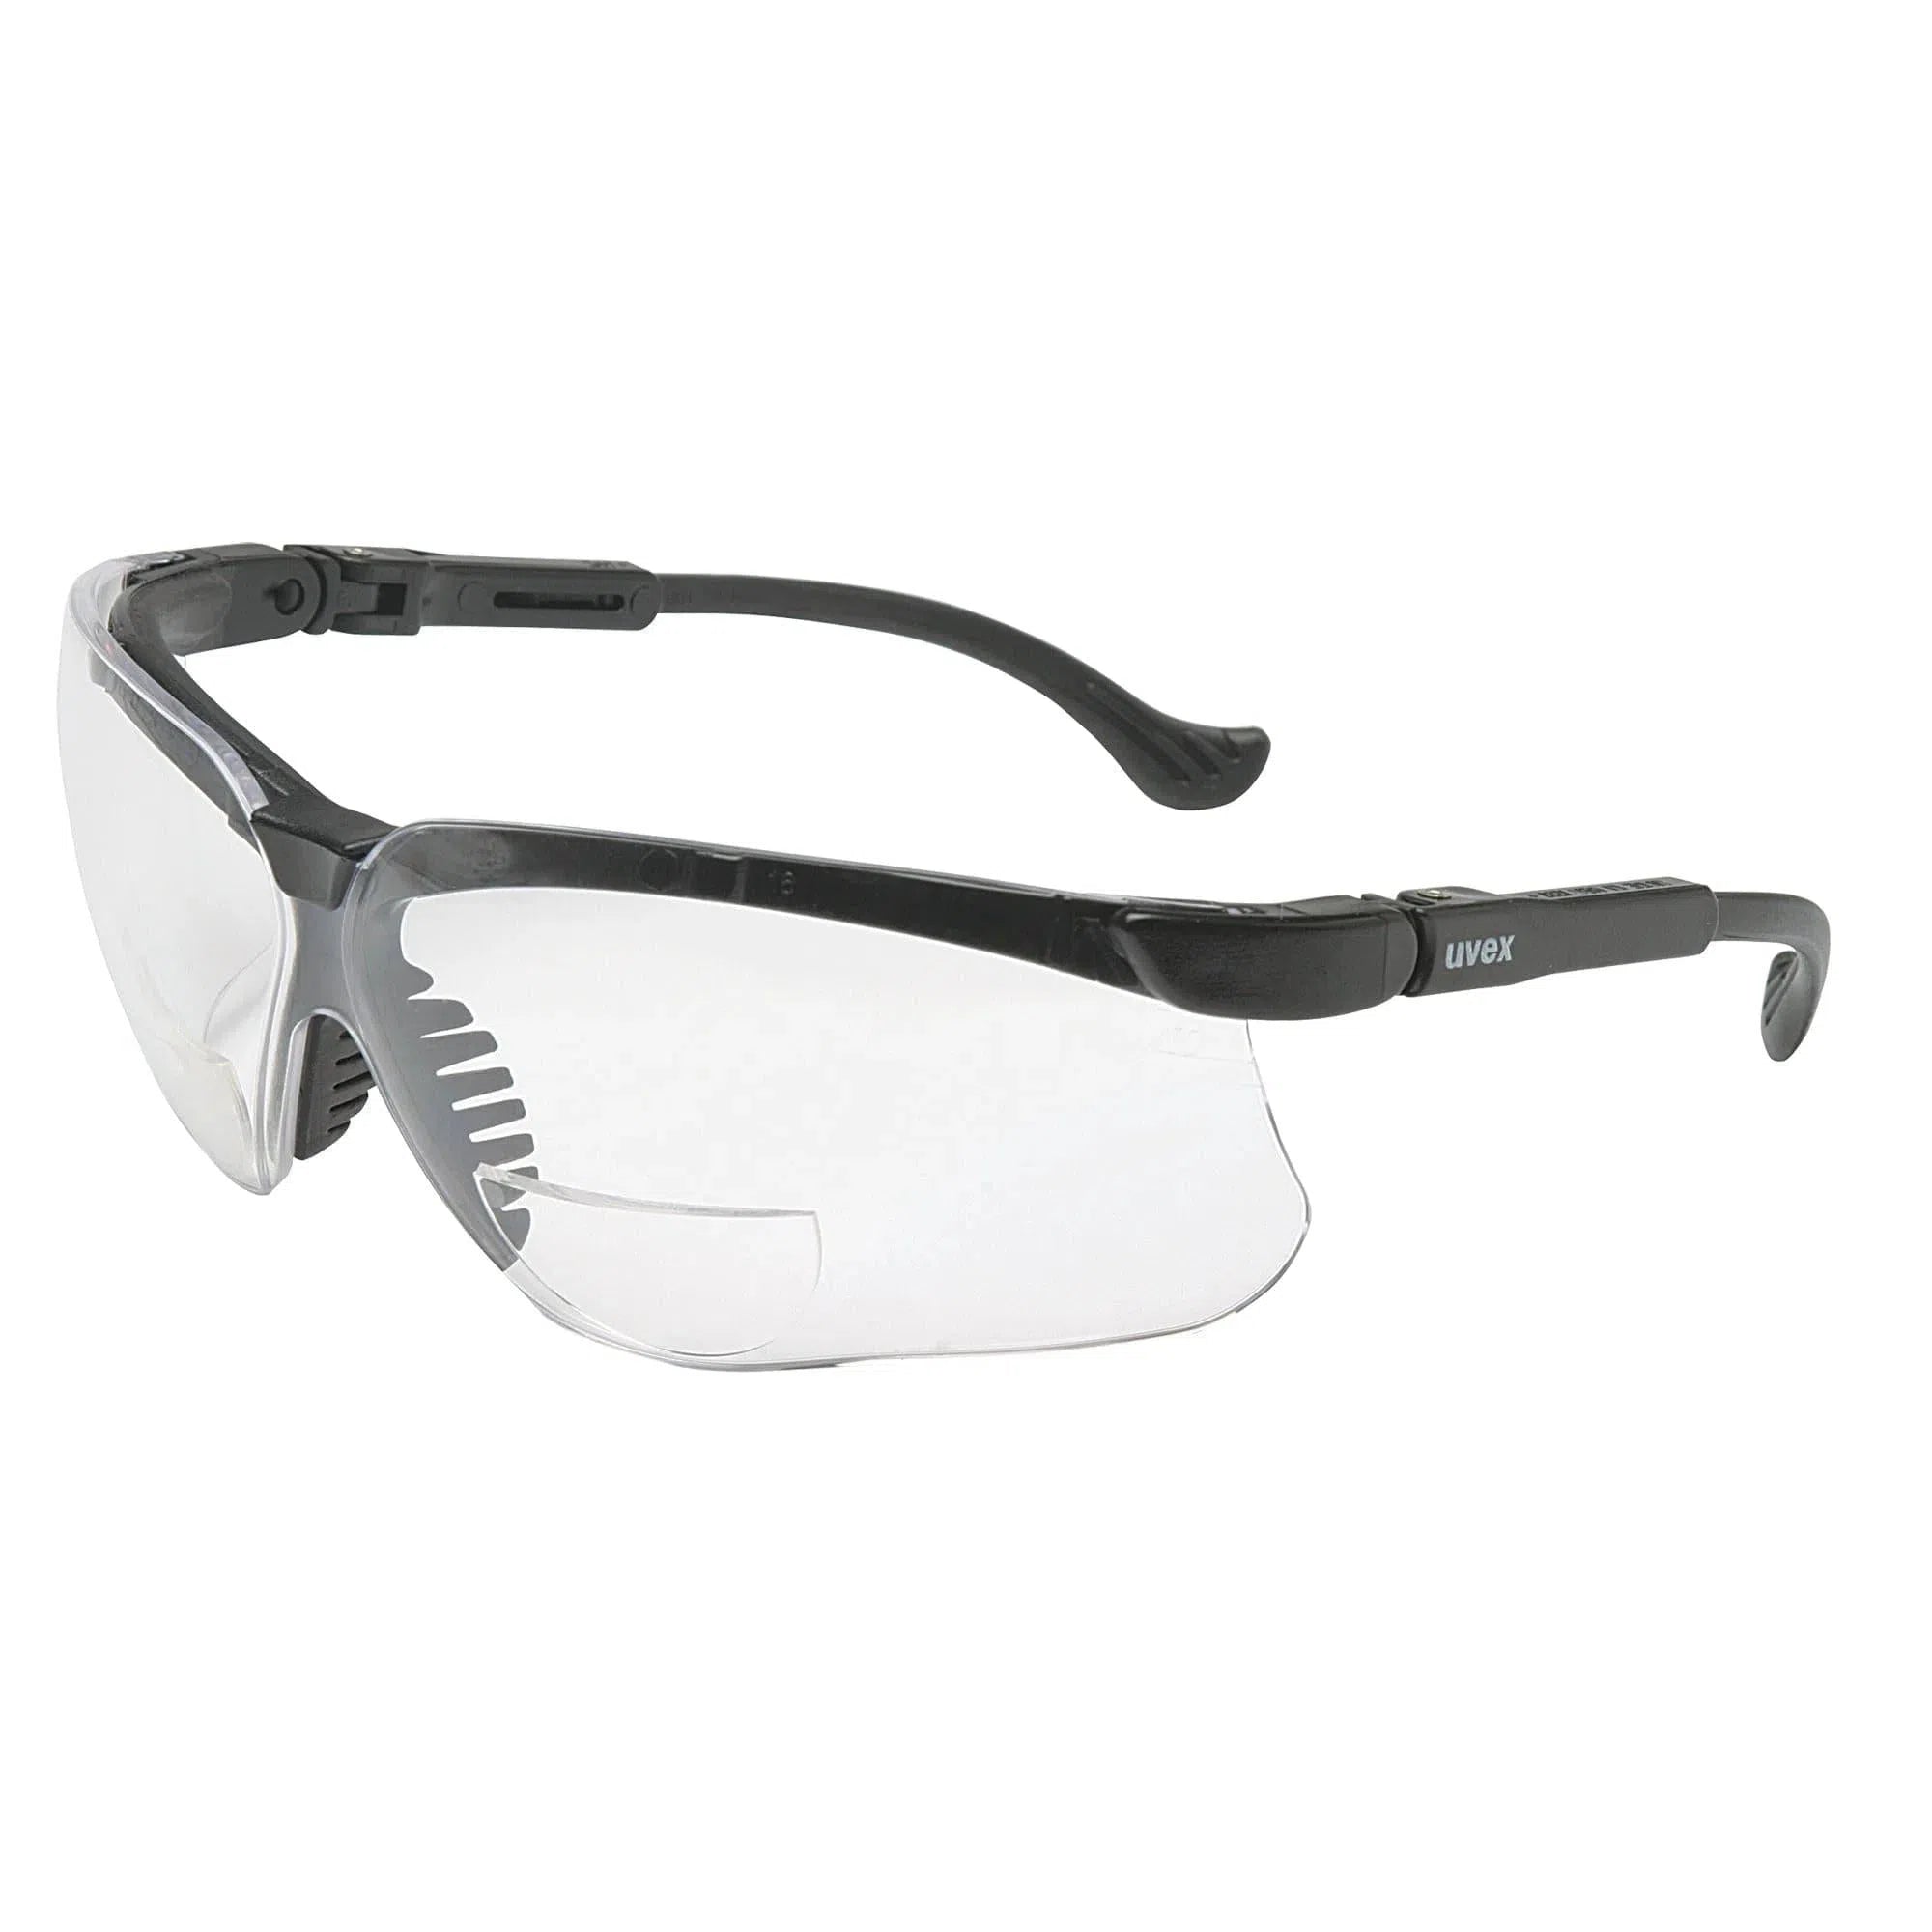 Uvex Genesis safety glasses with reading focus